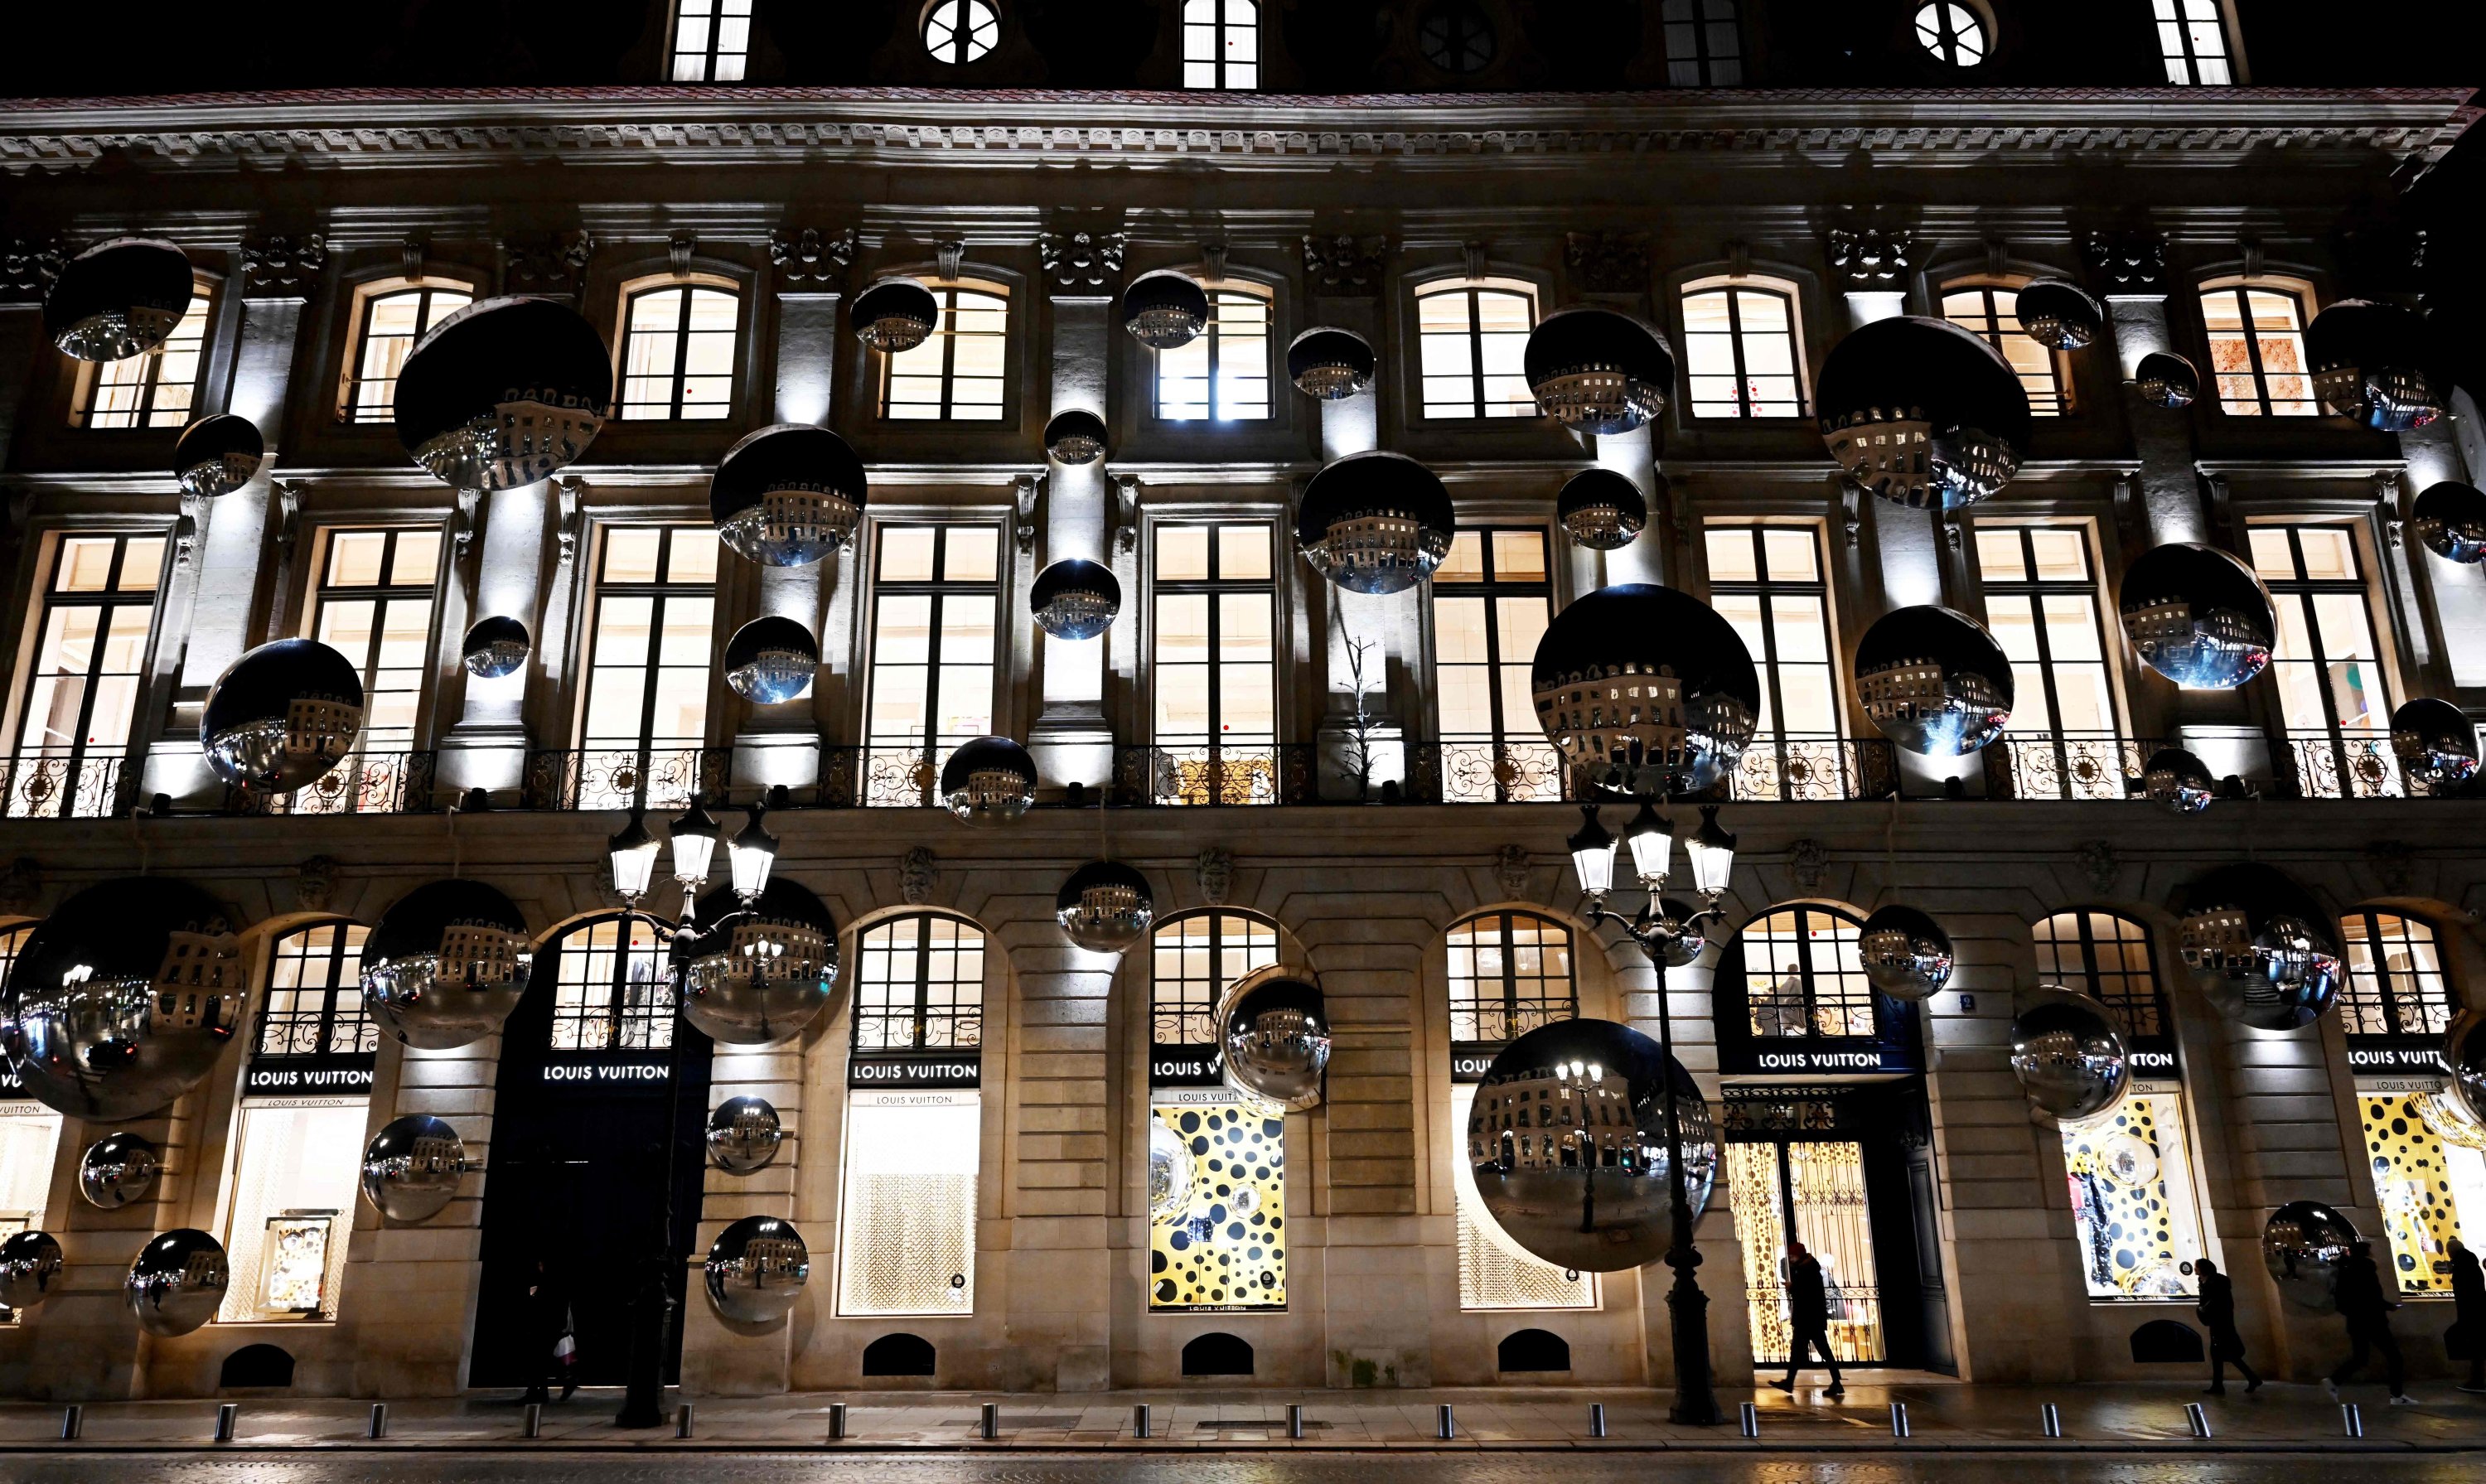 LVMH tests the limits of luxury